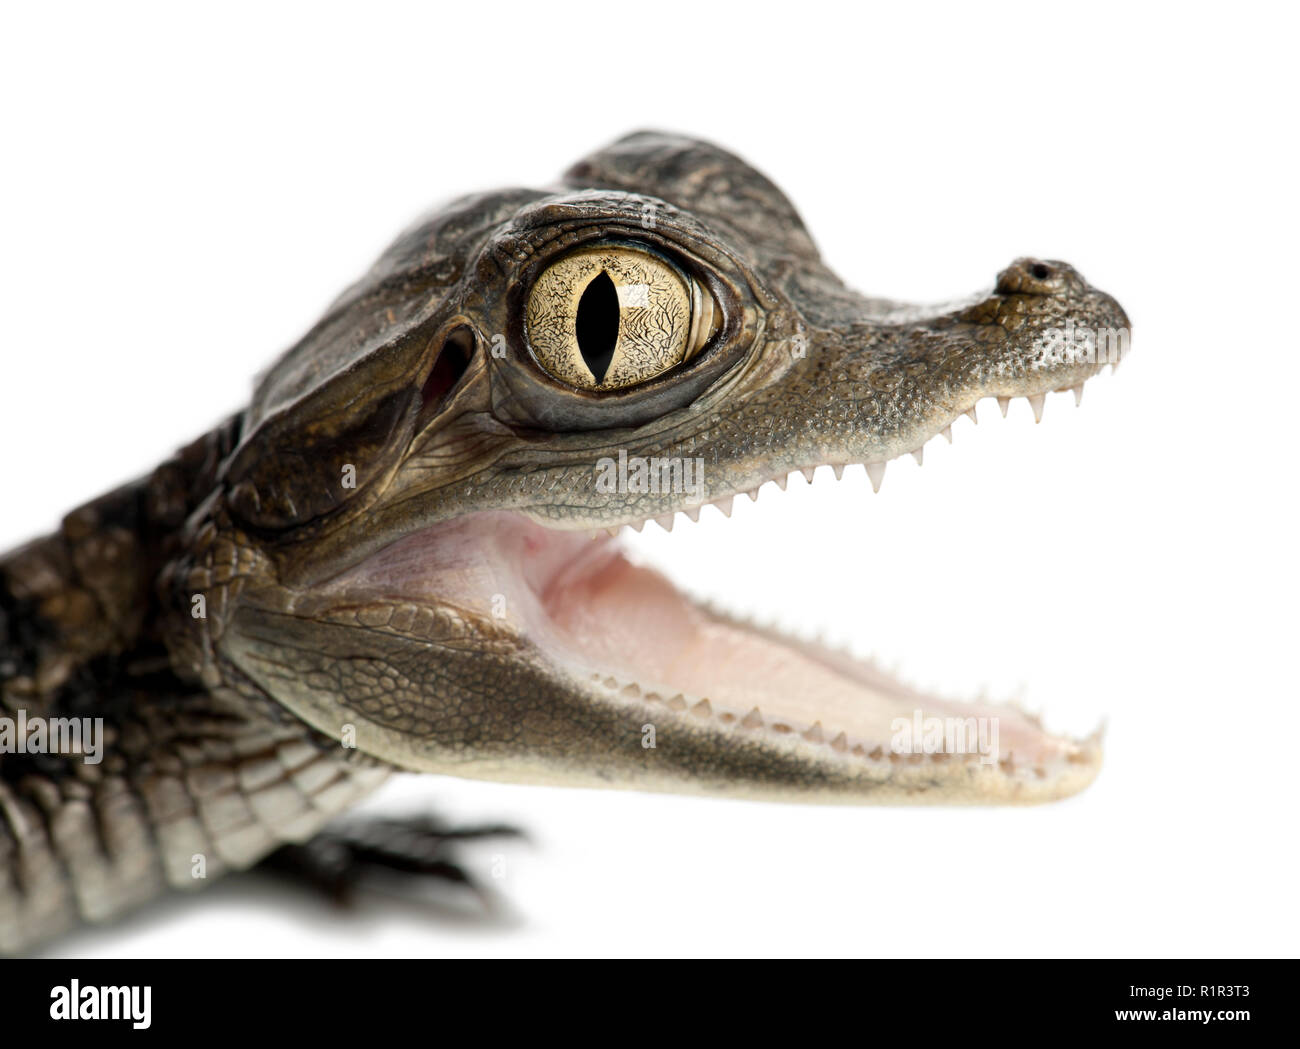 Spectacled Caiman, Caiman crocodilus, also known as a the White Caiman or Common Caiman, 2 months old, portrait and close up against white background Stock Photo